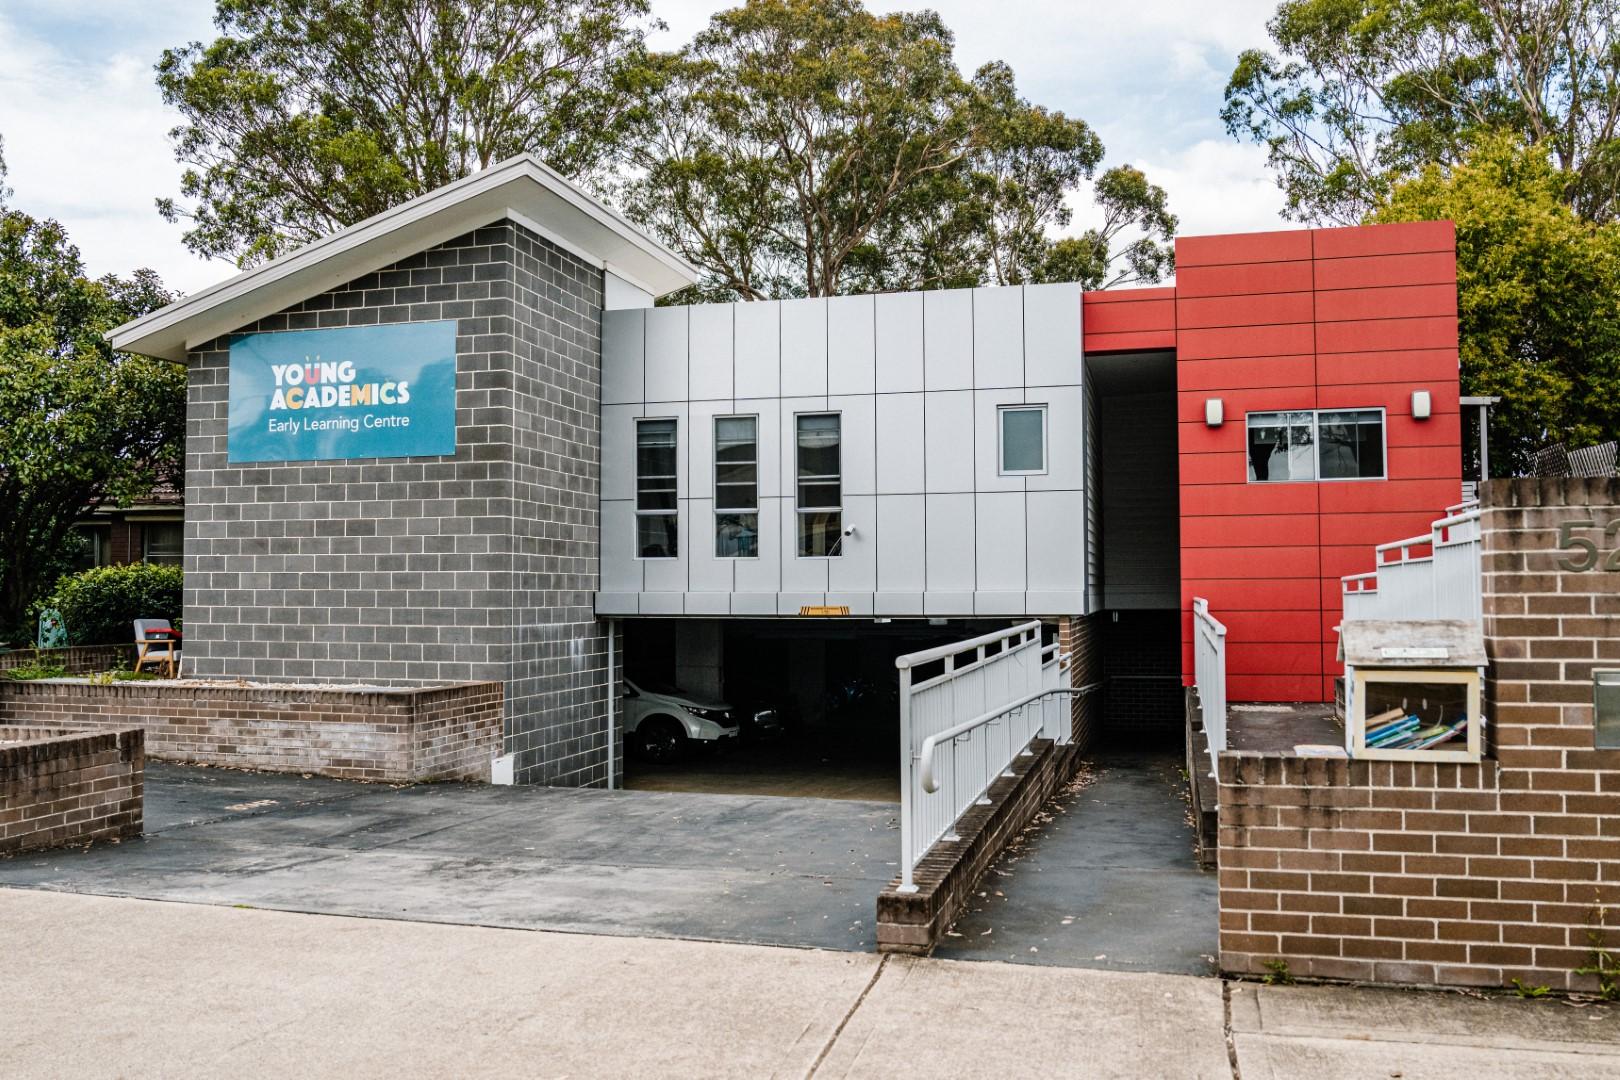 Images Young Academics Early Learning Centre - Toongabbie